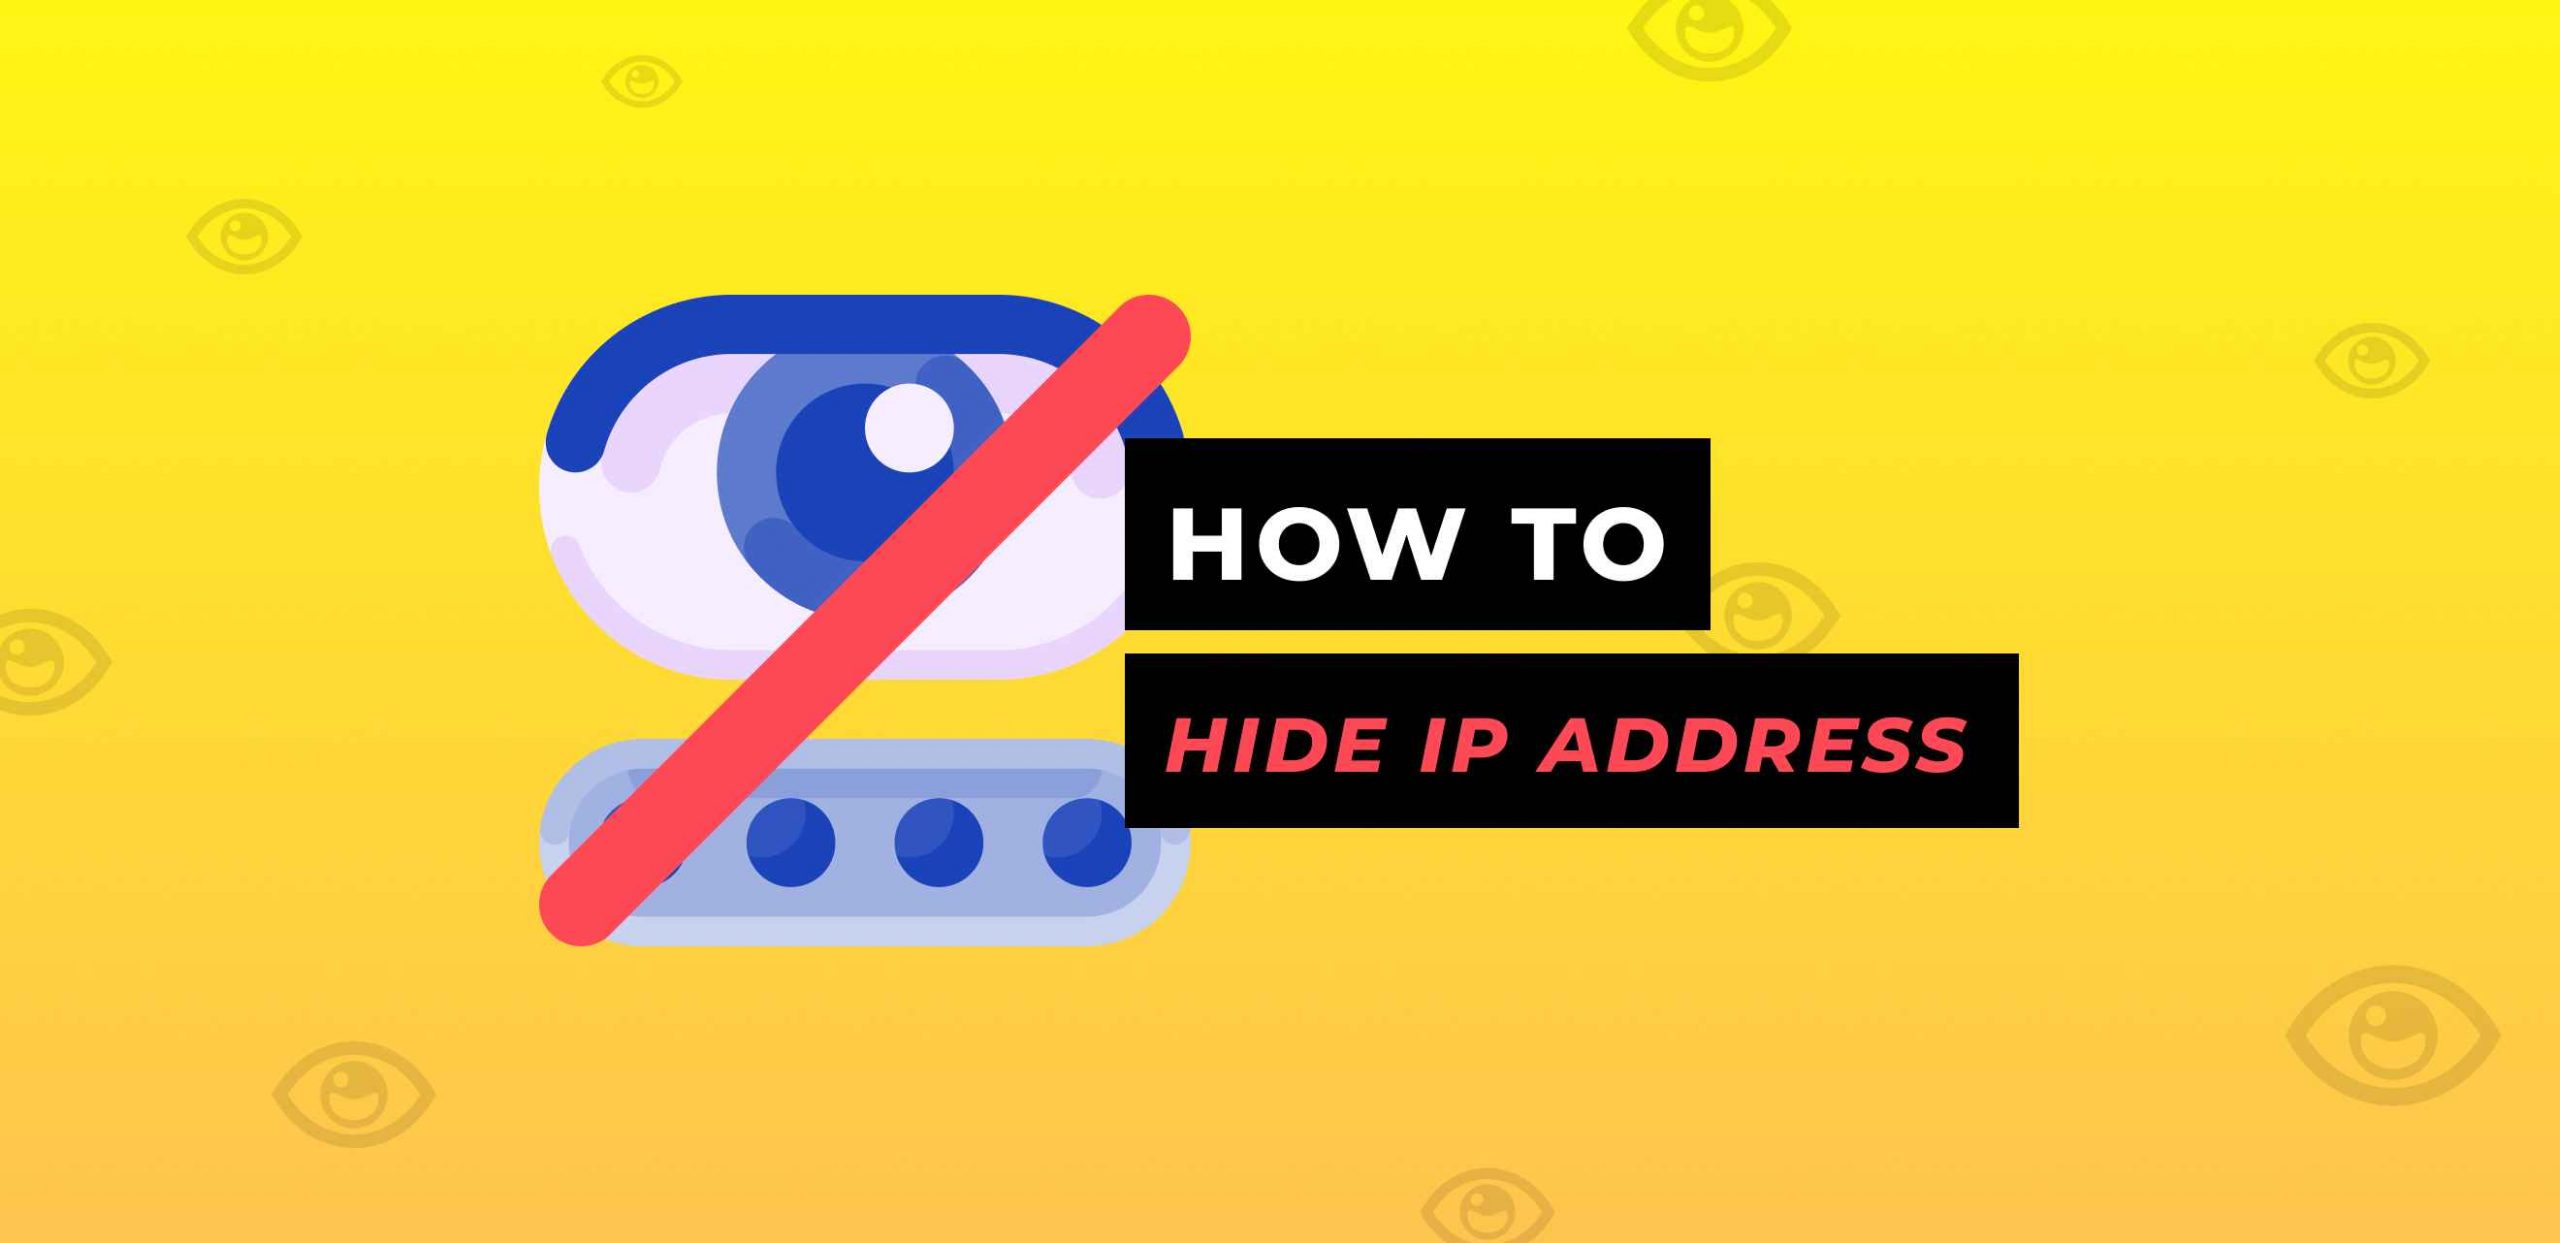 How to Use a Fake IP Address and Mask Yourself Online